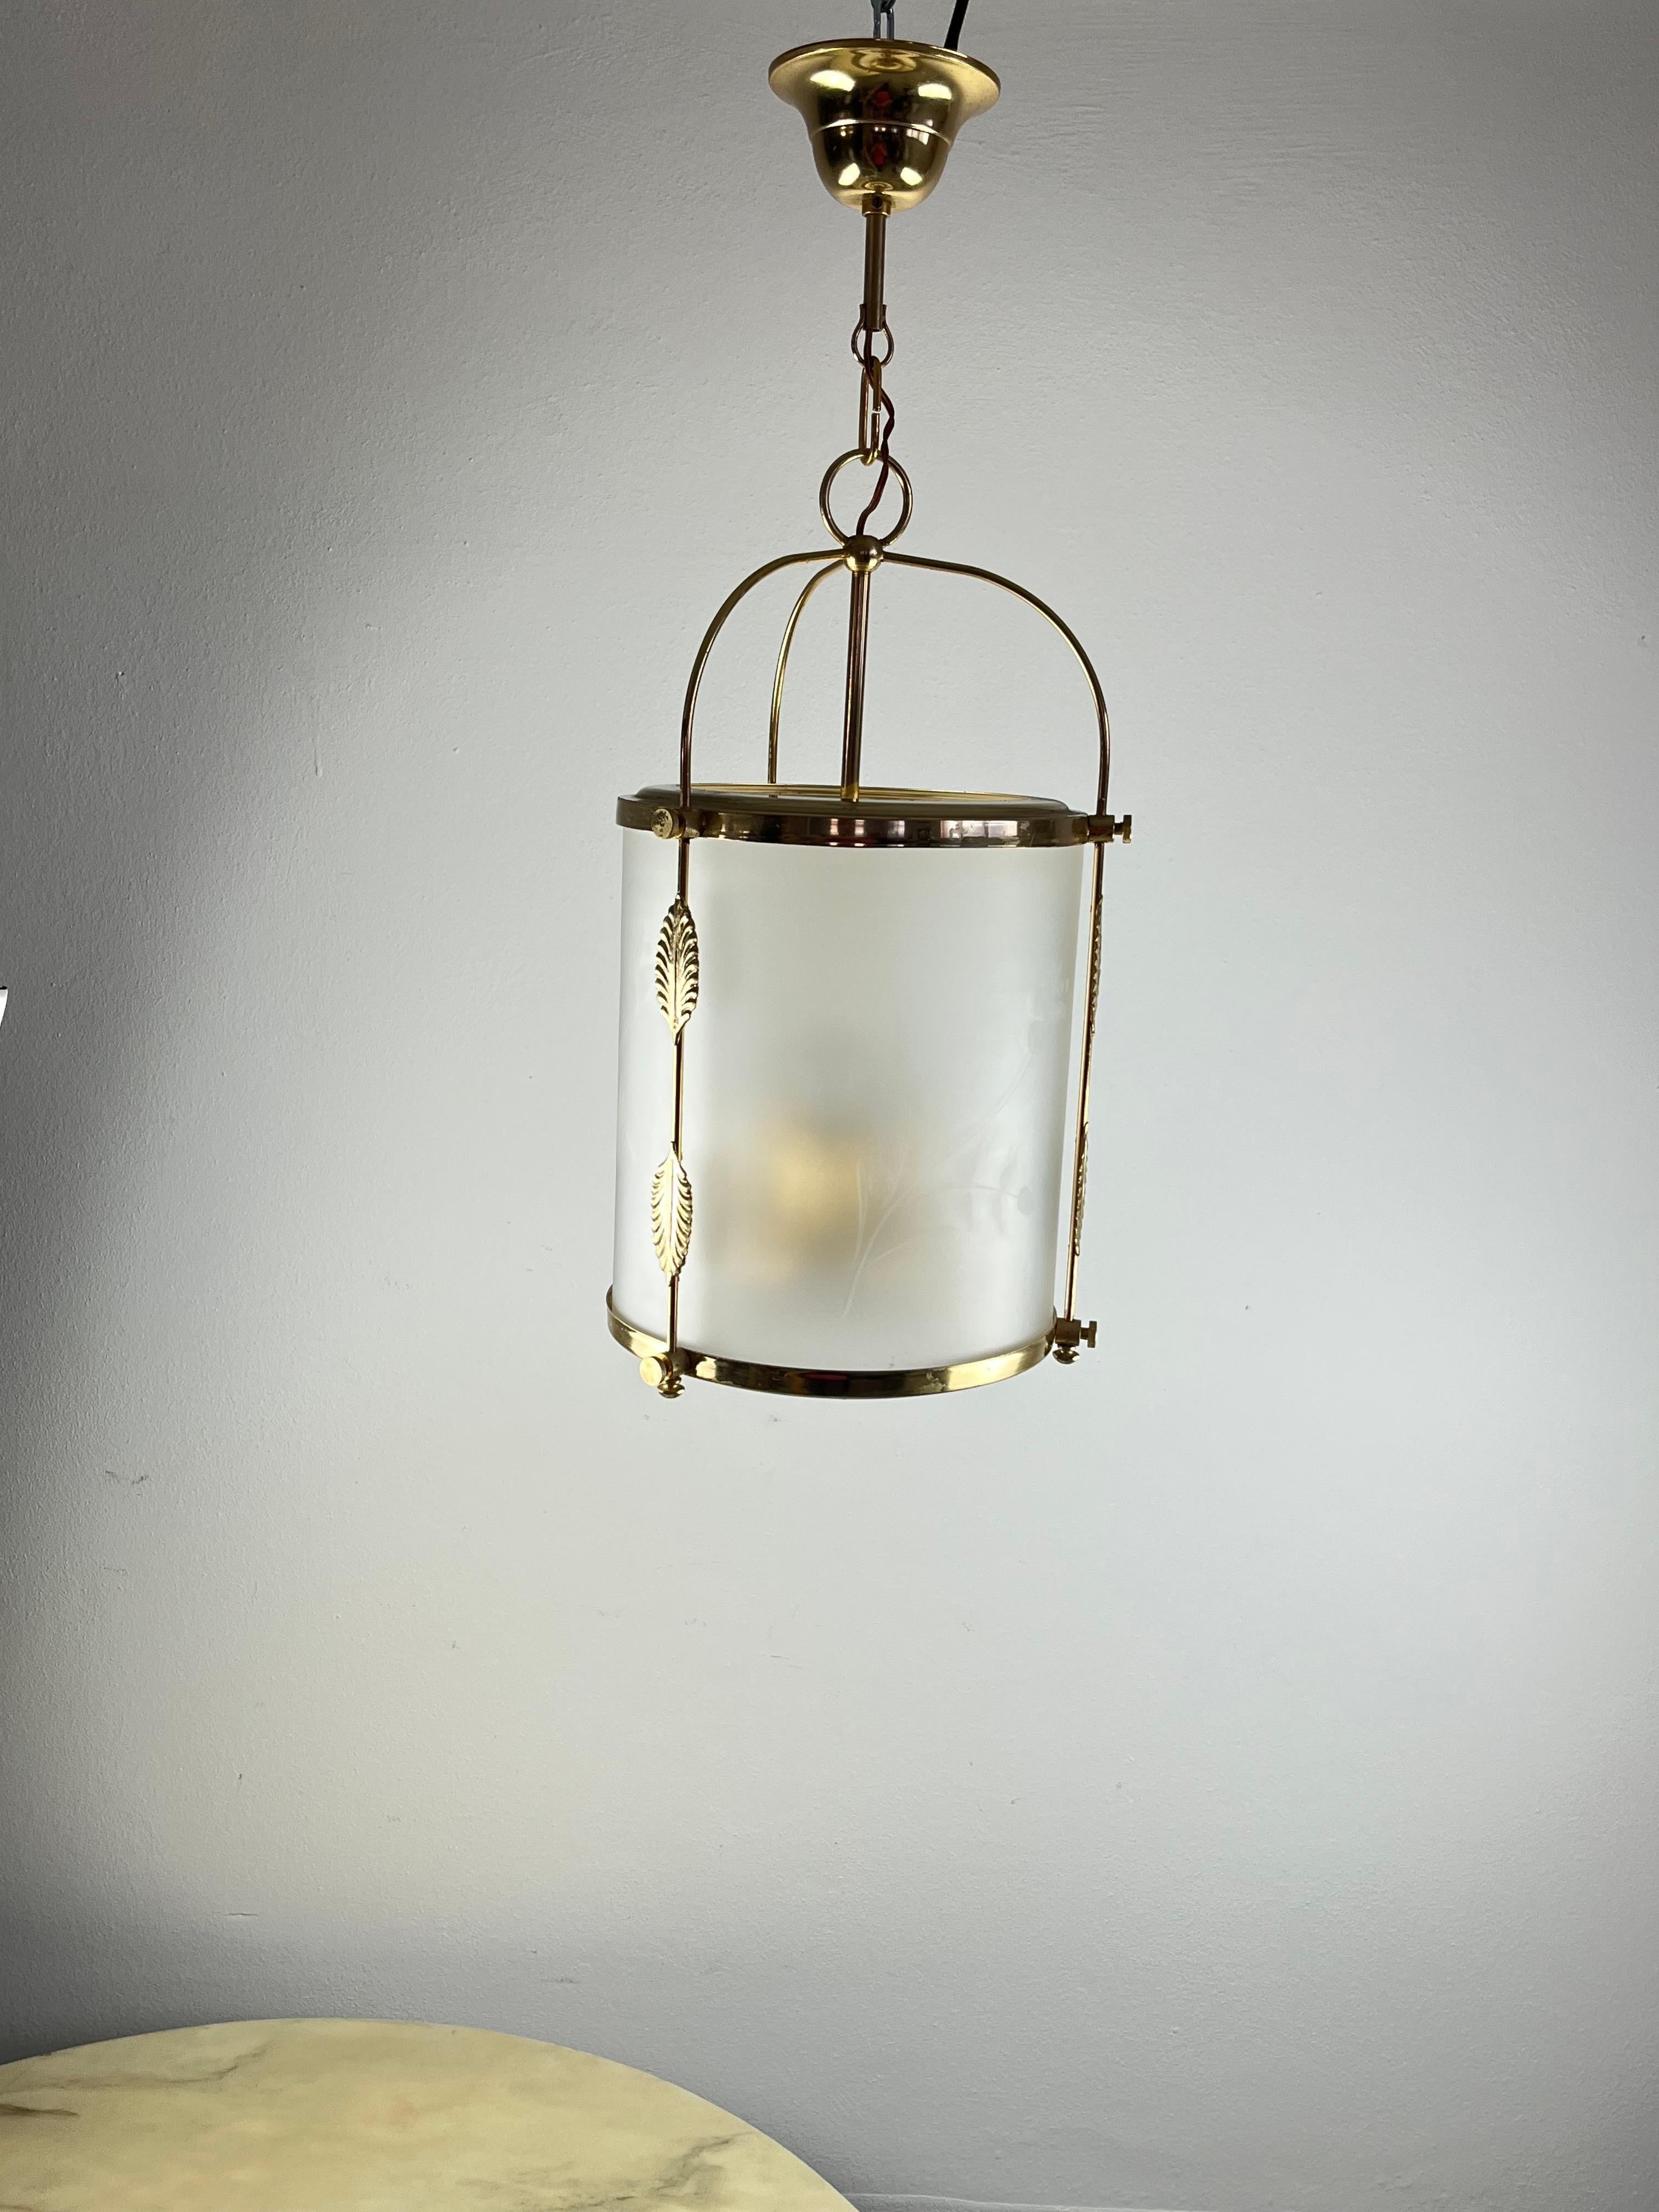 Three-light chandelier in worked glass and gilded metal, Italy, 1960s
Found in a noble apartment in the Sicilian hinterland. The gilding shows signs of aging in some places.
Height 63 cm with the chain, 46 cm without.
